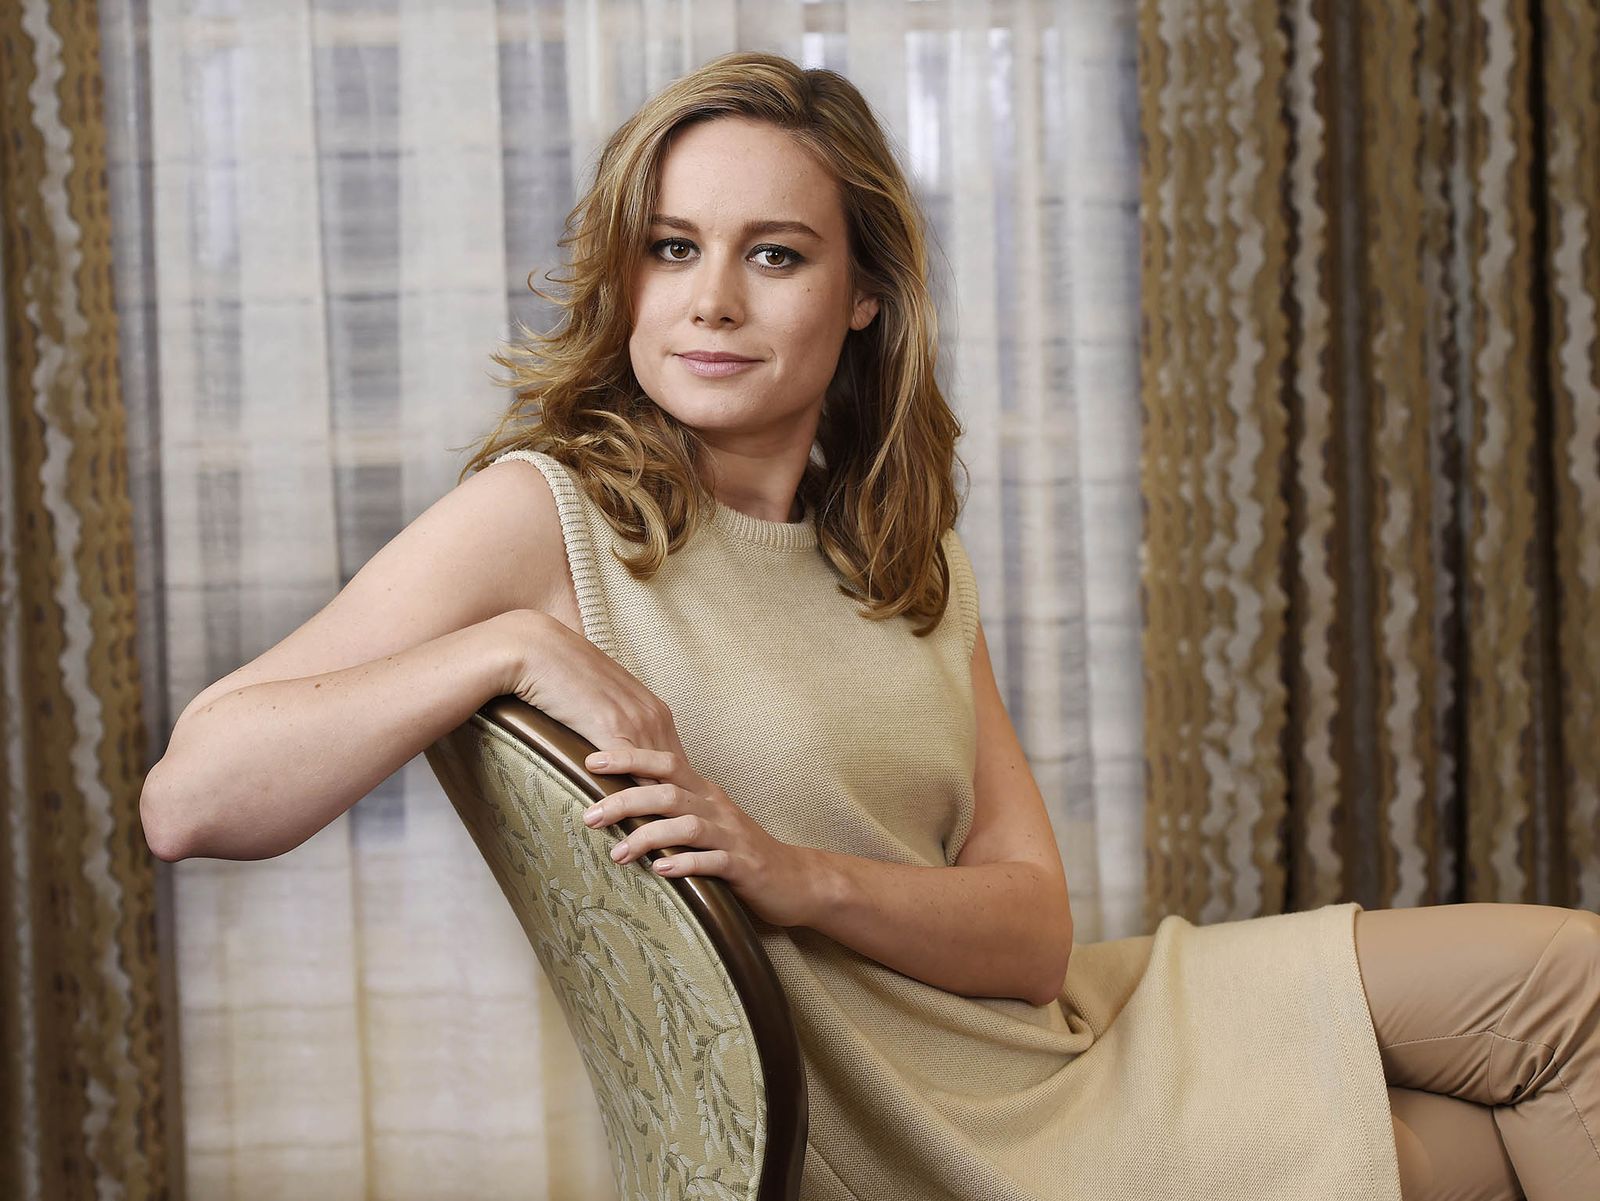 “I Felt Lonely And Bad Sometimes”, Reveals Brie Larson